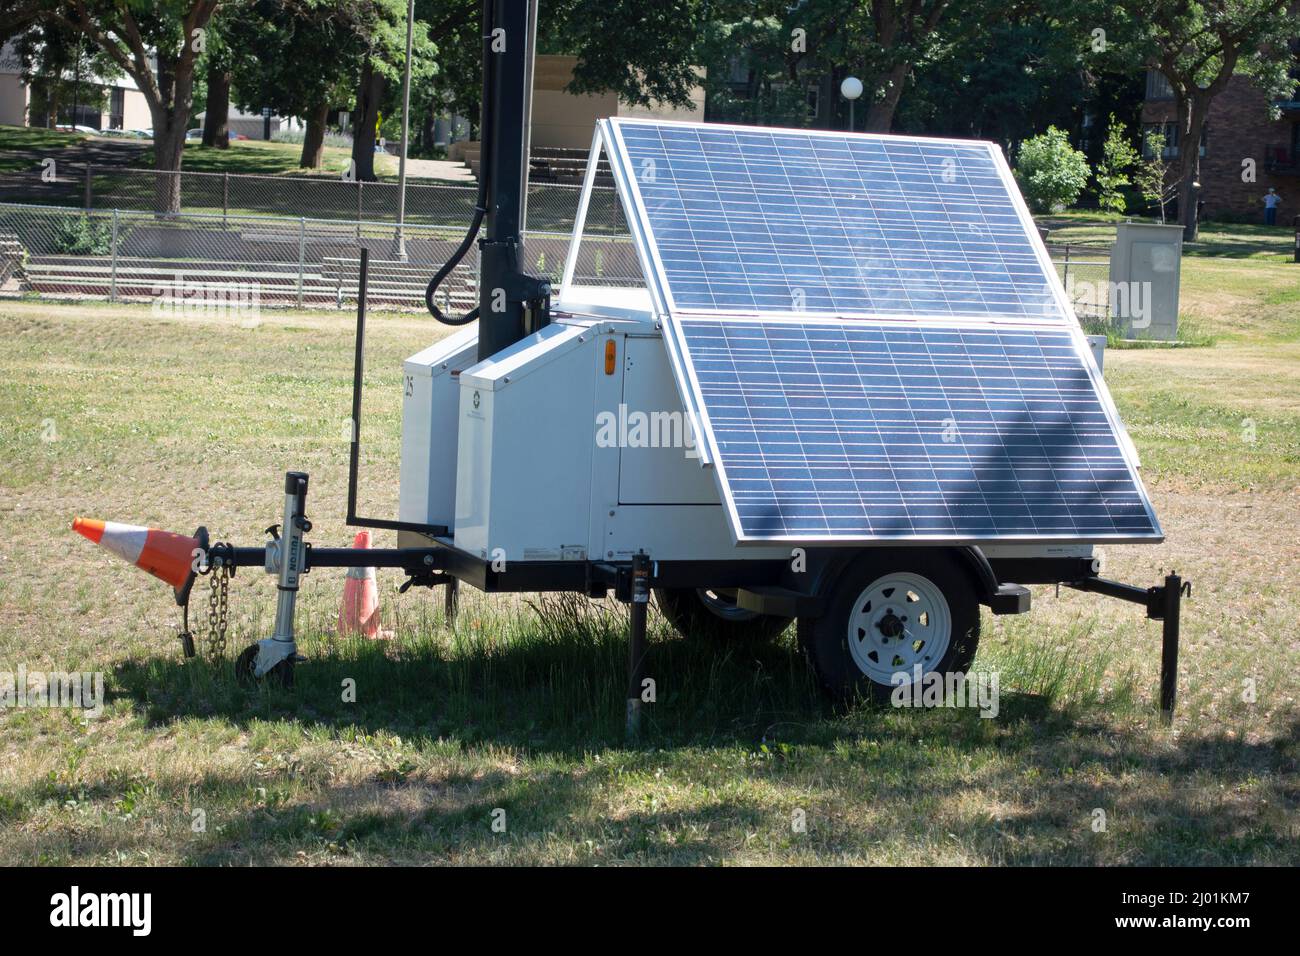 Portable solar collector on wheels for an electrical supply. St Paul Minnesota MN USA Stock Photo